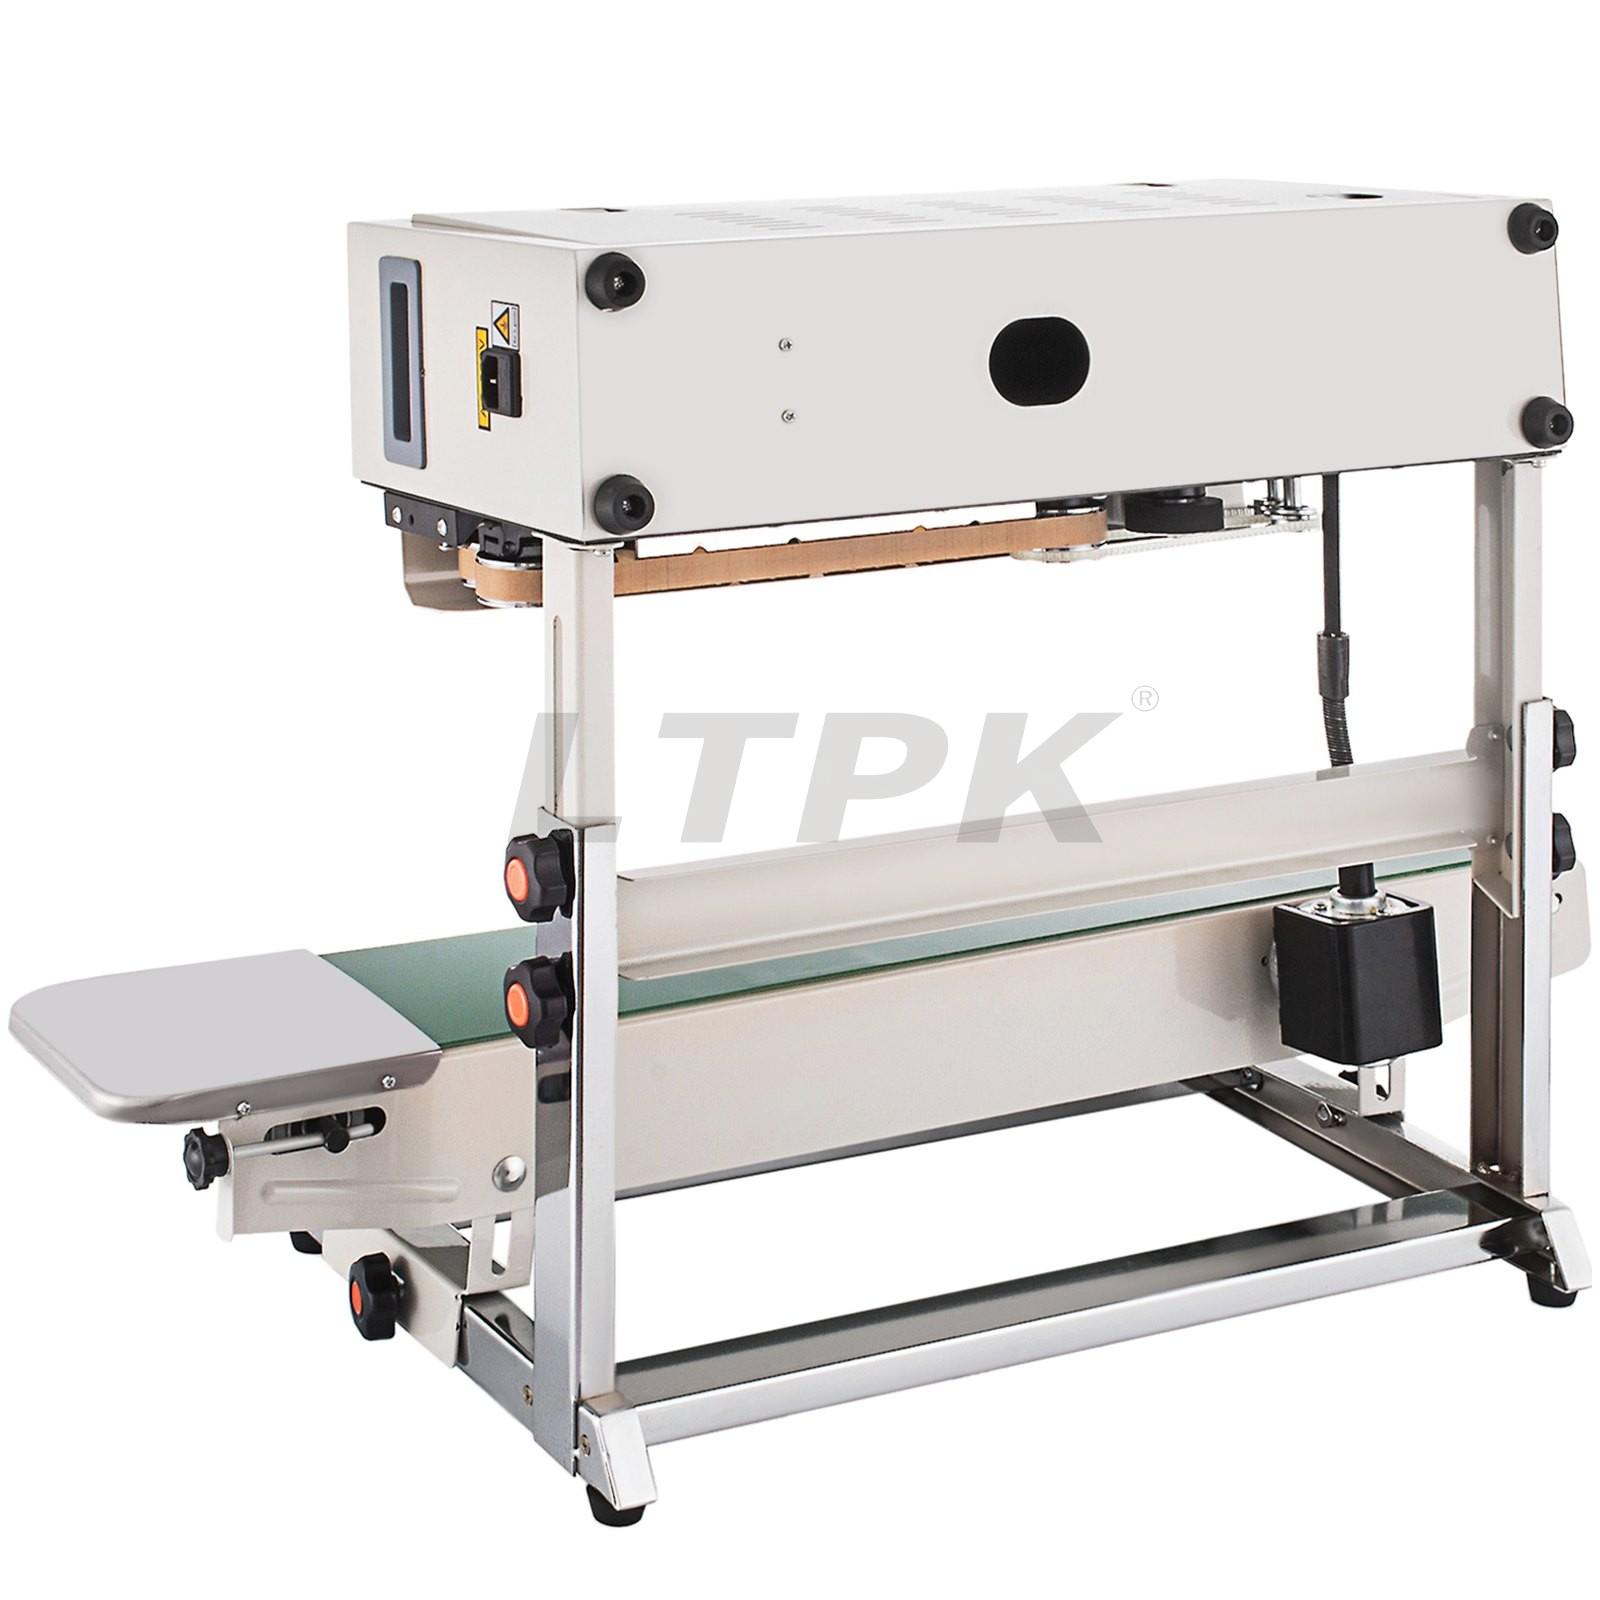 LTPK FR-900V-MS Automatic Continuous Sealing Machine with Digital Temperature Control